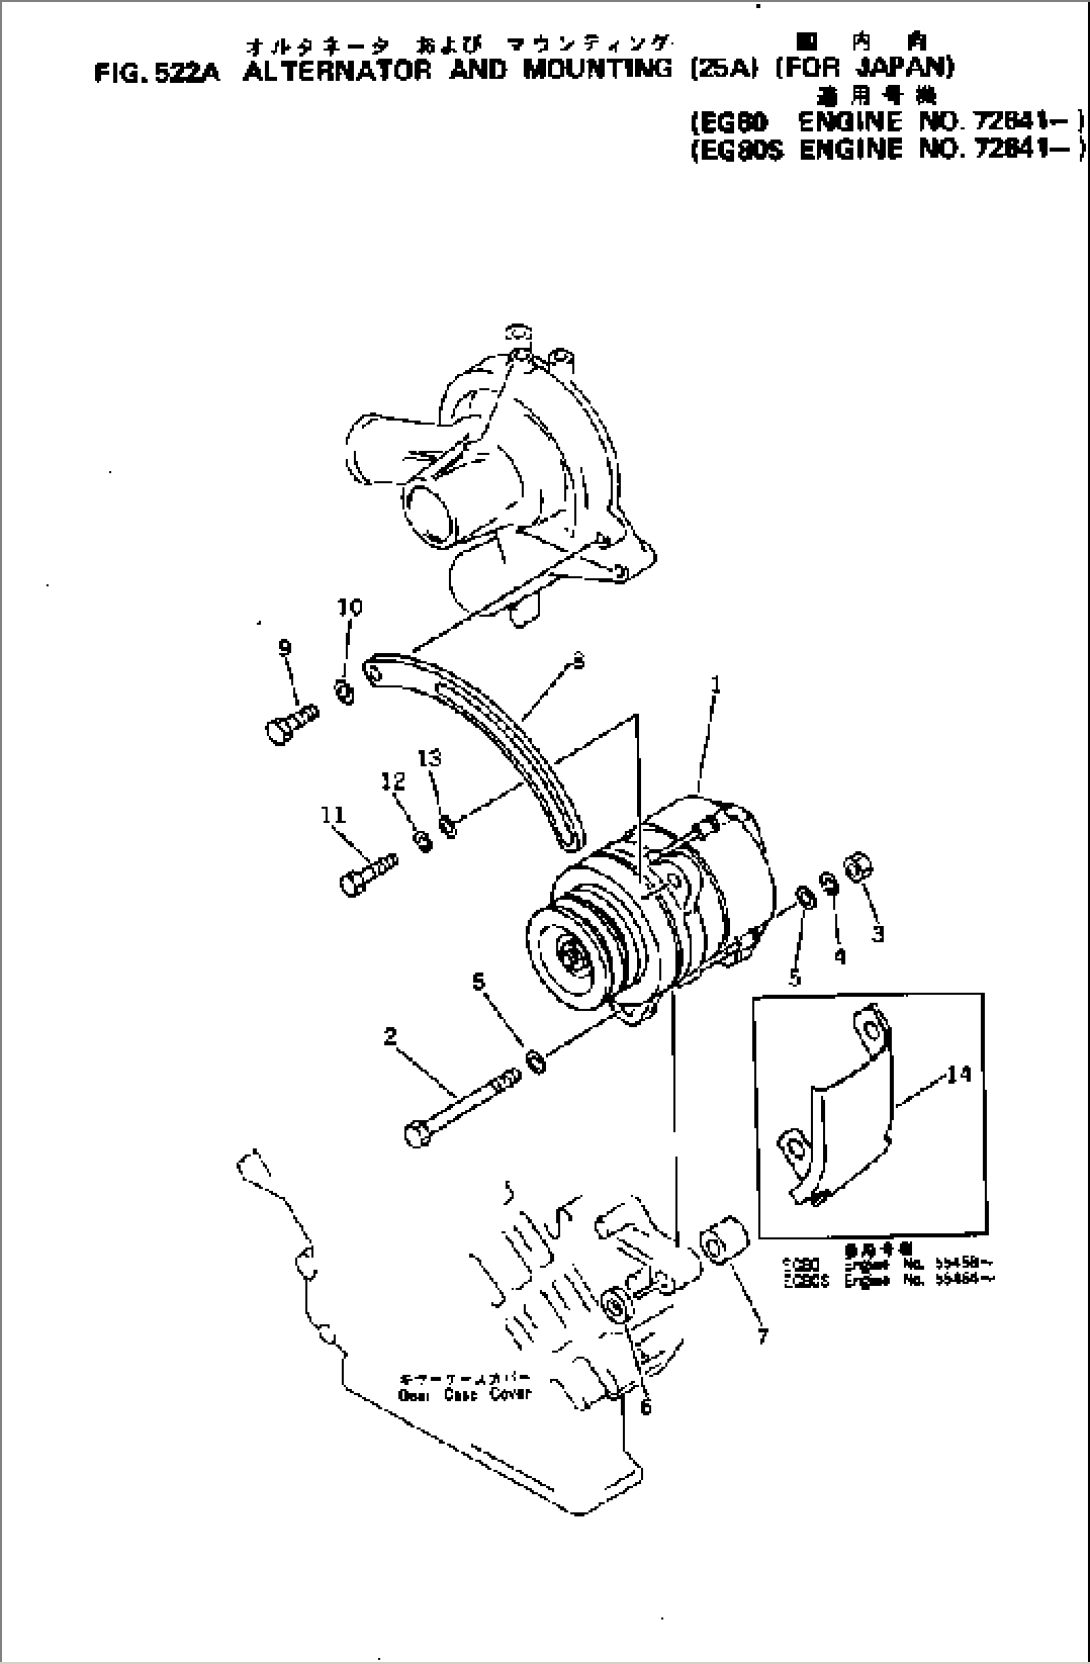 ALTERNATOR AND MOUNTING (25A)(#72641-)